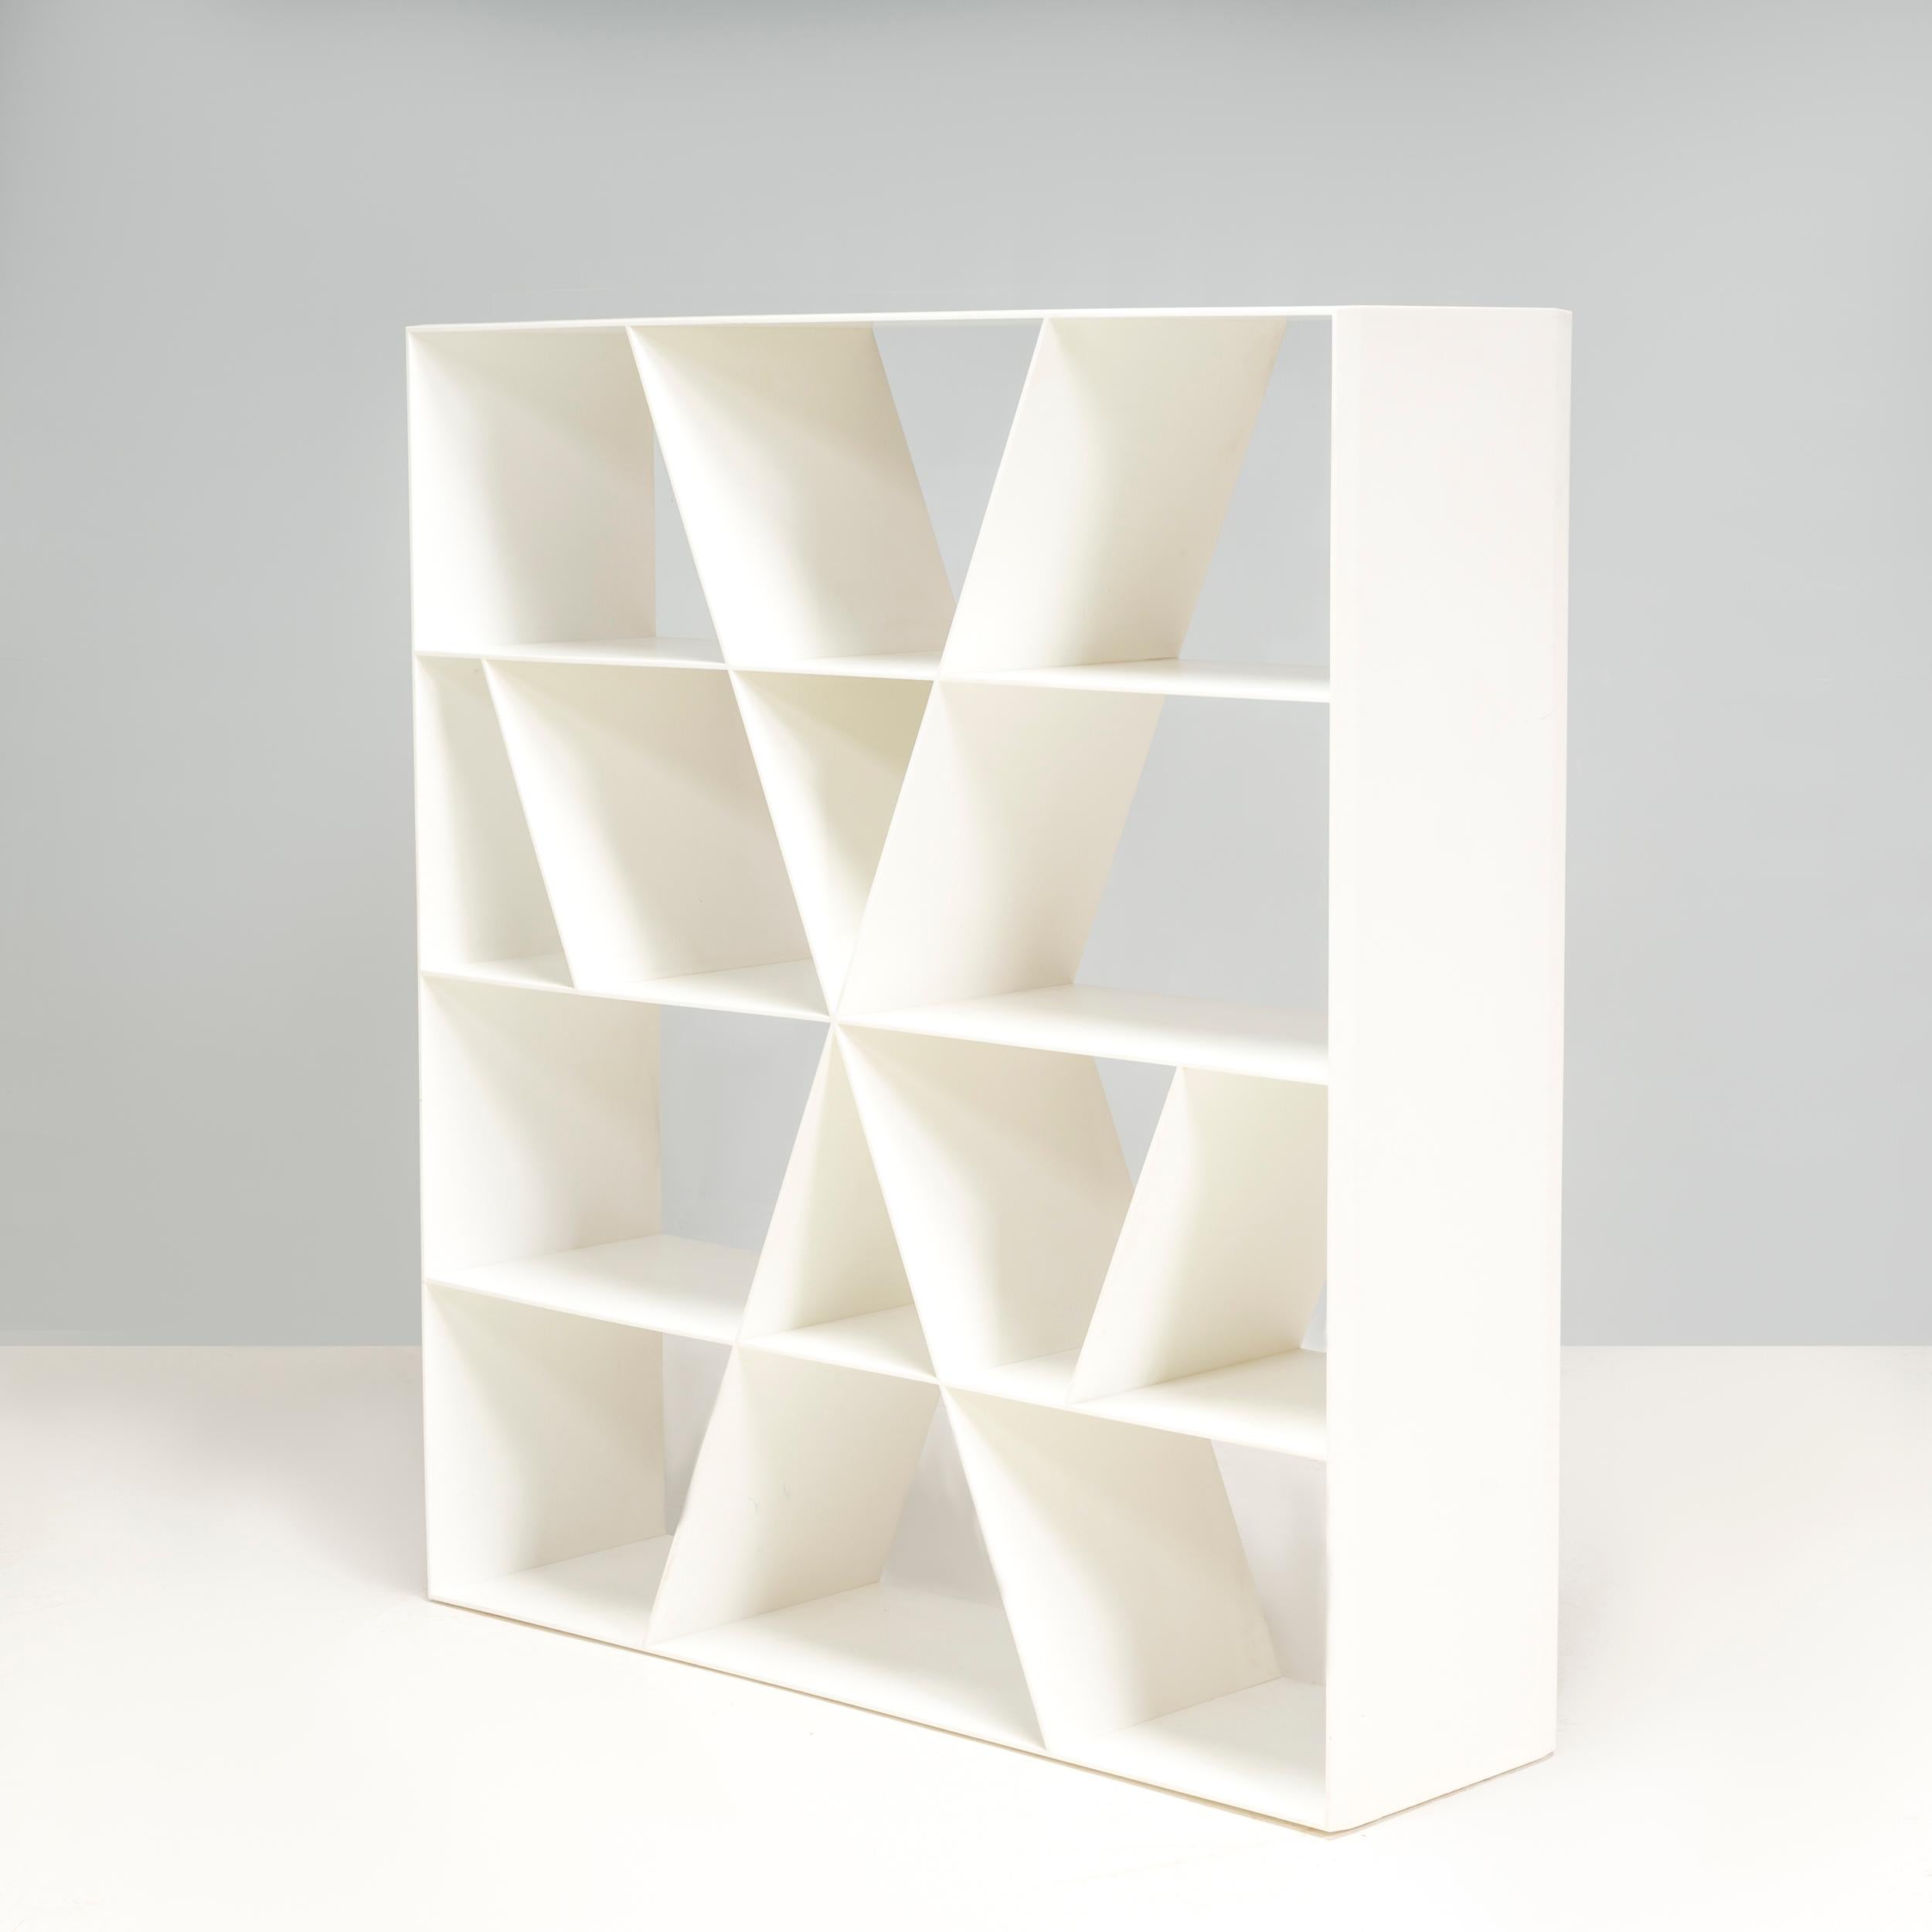 Created by Naoto Fukasawa in 2006 for B&B Italia, the 'X' shelf storage unit is composed by sloping shelves and interior panels which are characterised by numerous intersecting lines. Varnished completely in white, the elegant design will bring